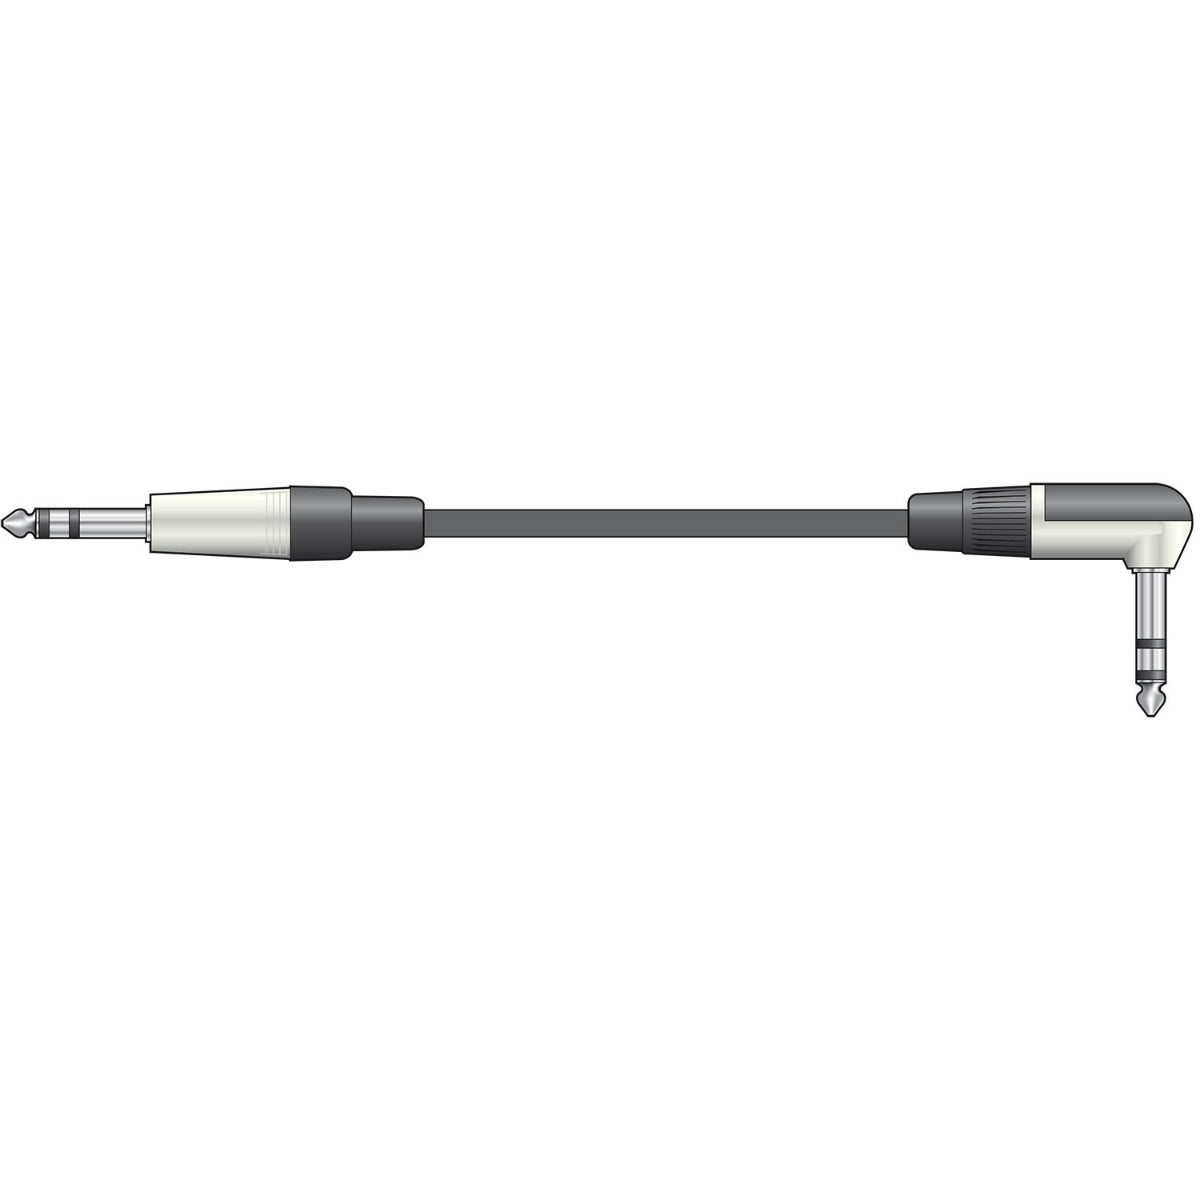 Chord 6m 6.3 TRS Right-Angle Jack To Straight Jack Lead (190272)